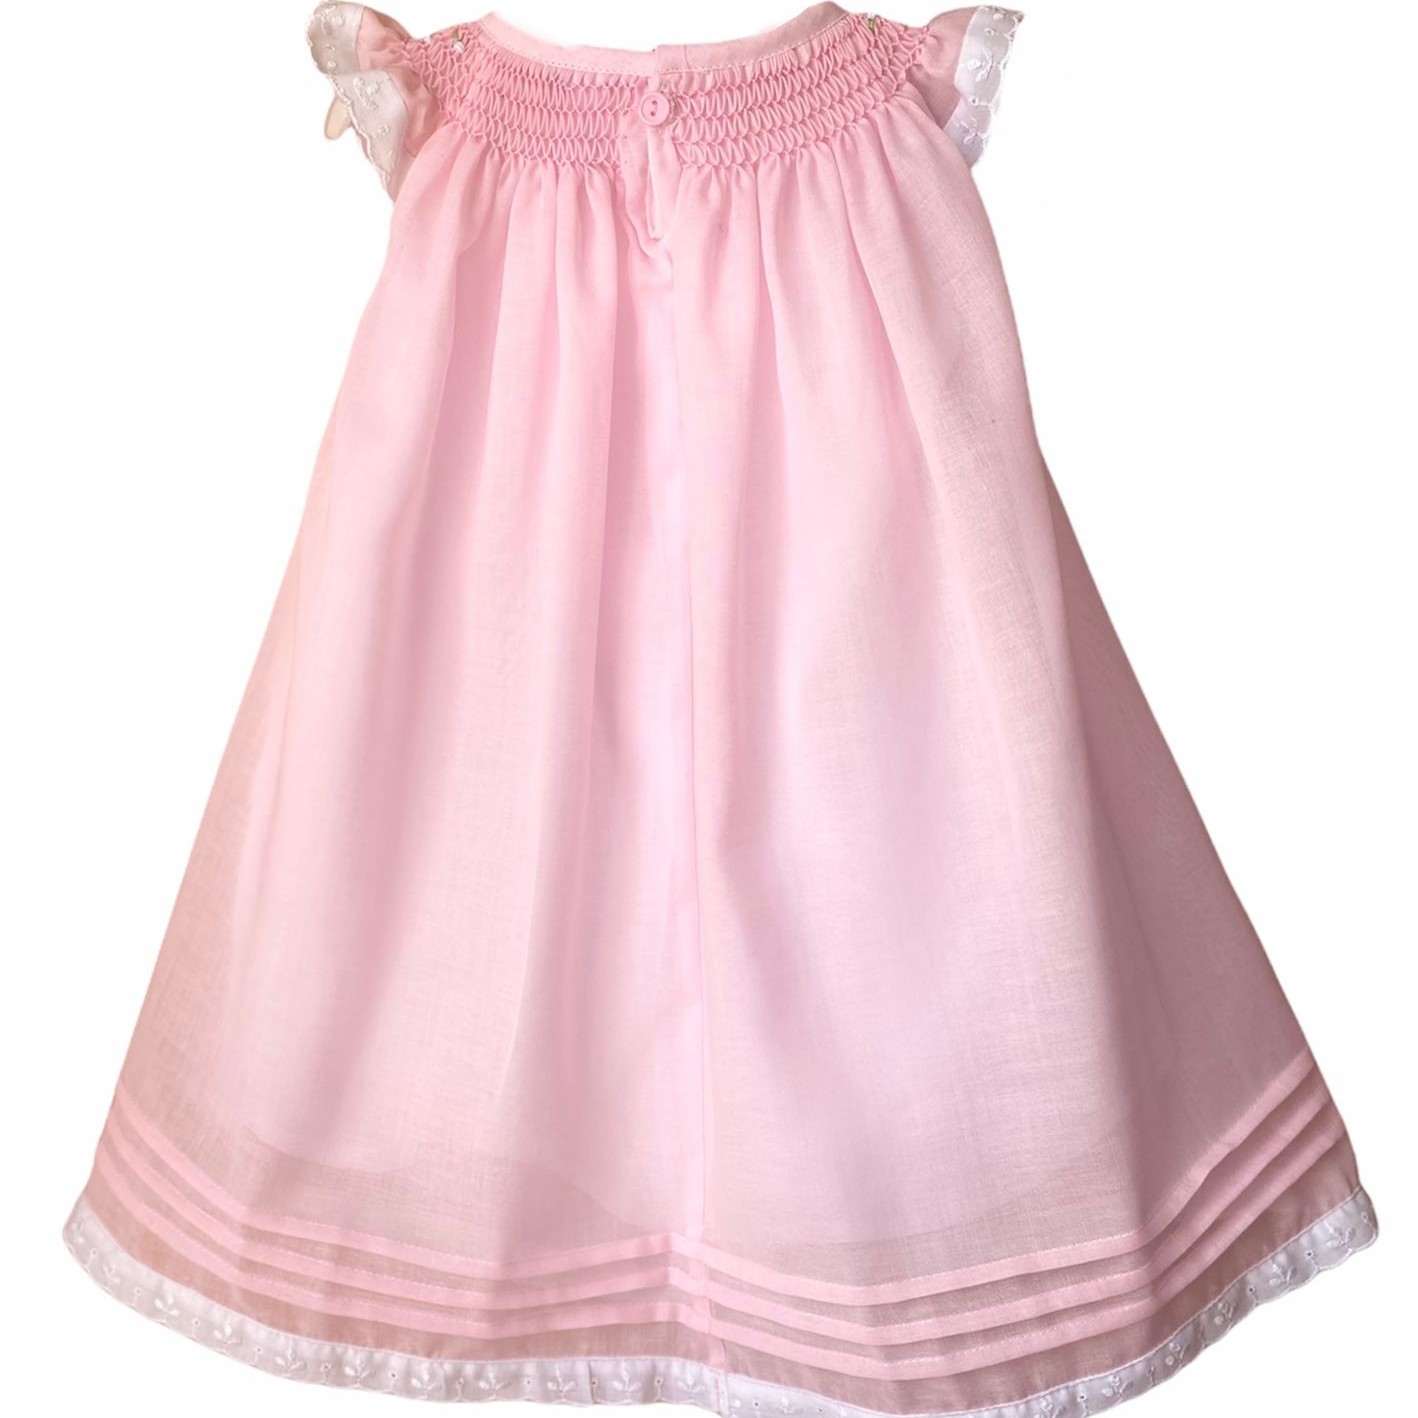 Girl's Dress with Hand Embroidery - Pink Color with White Embroidery